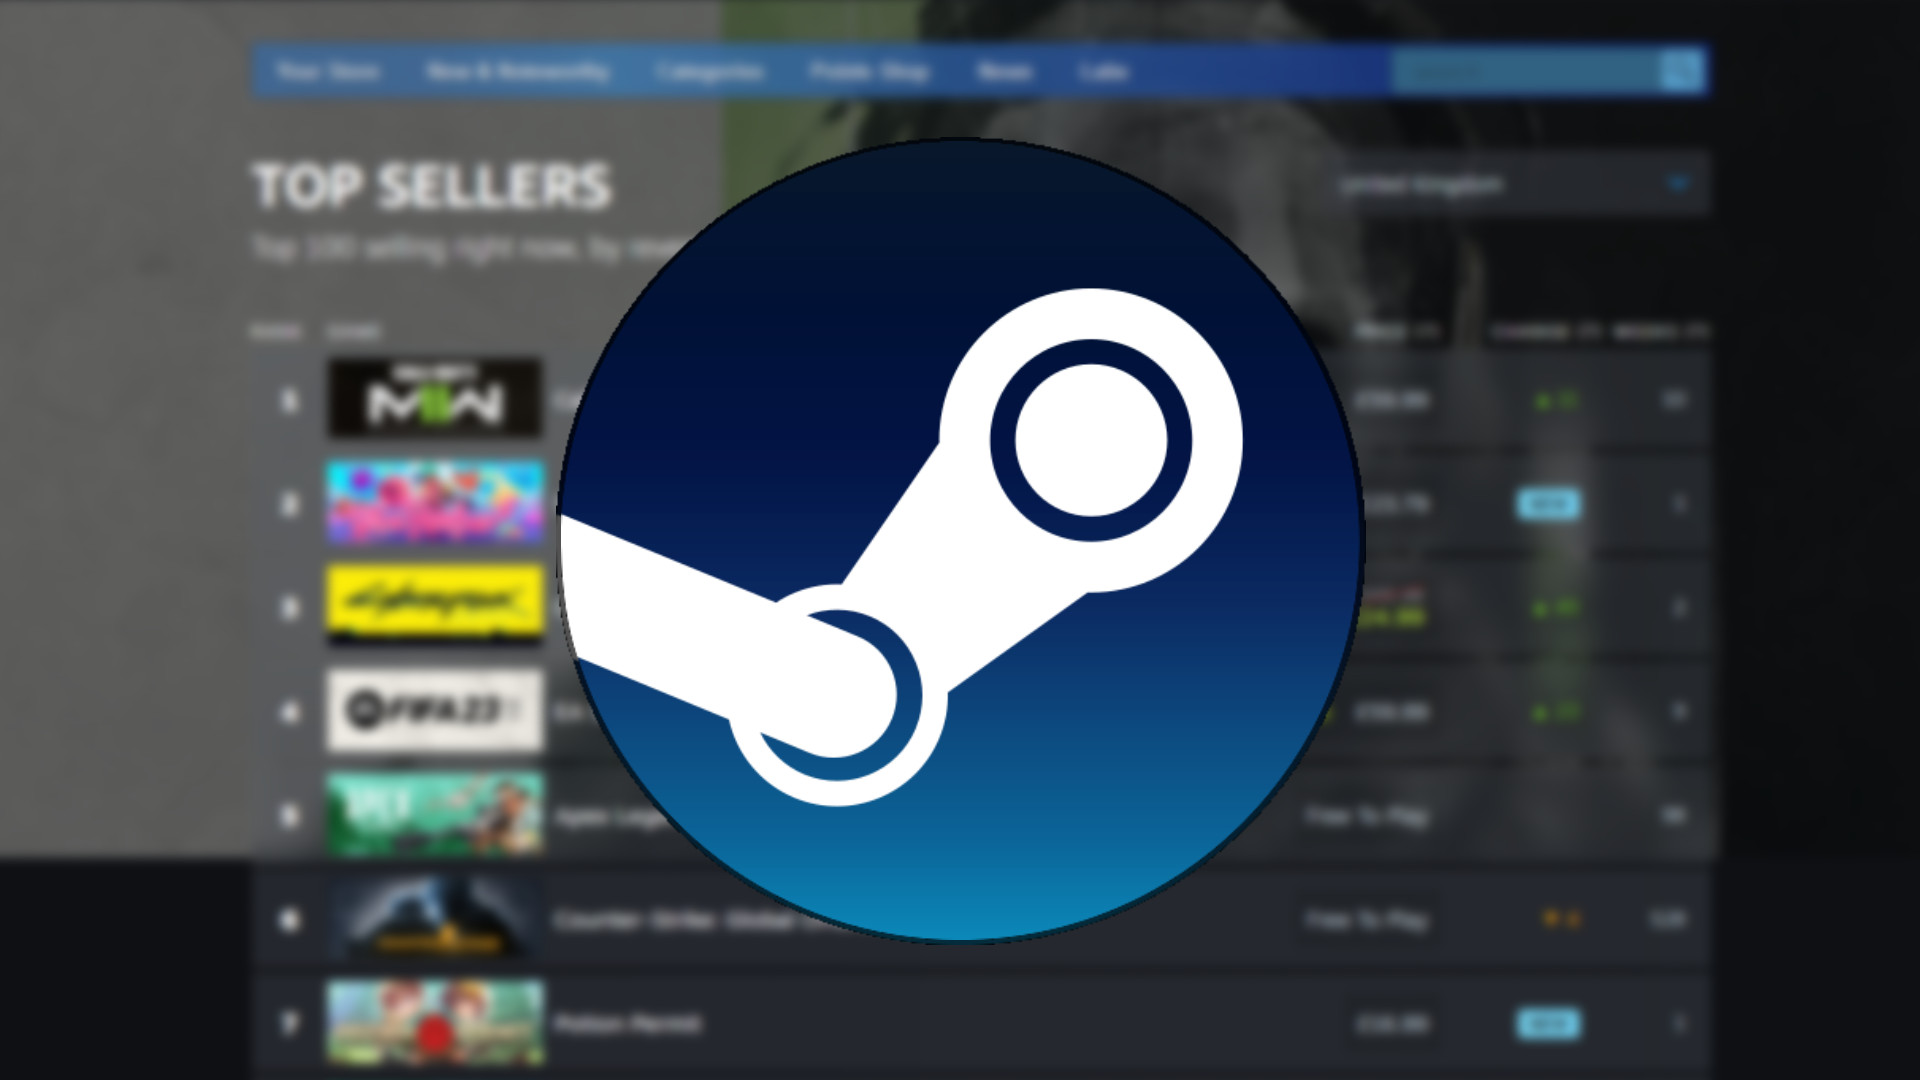 Valve replaces Steam's stats page with new real-time and weekly